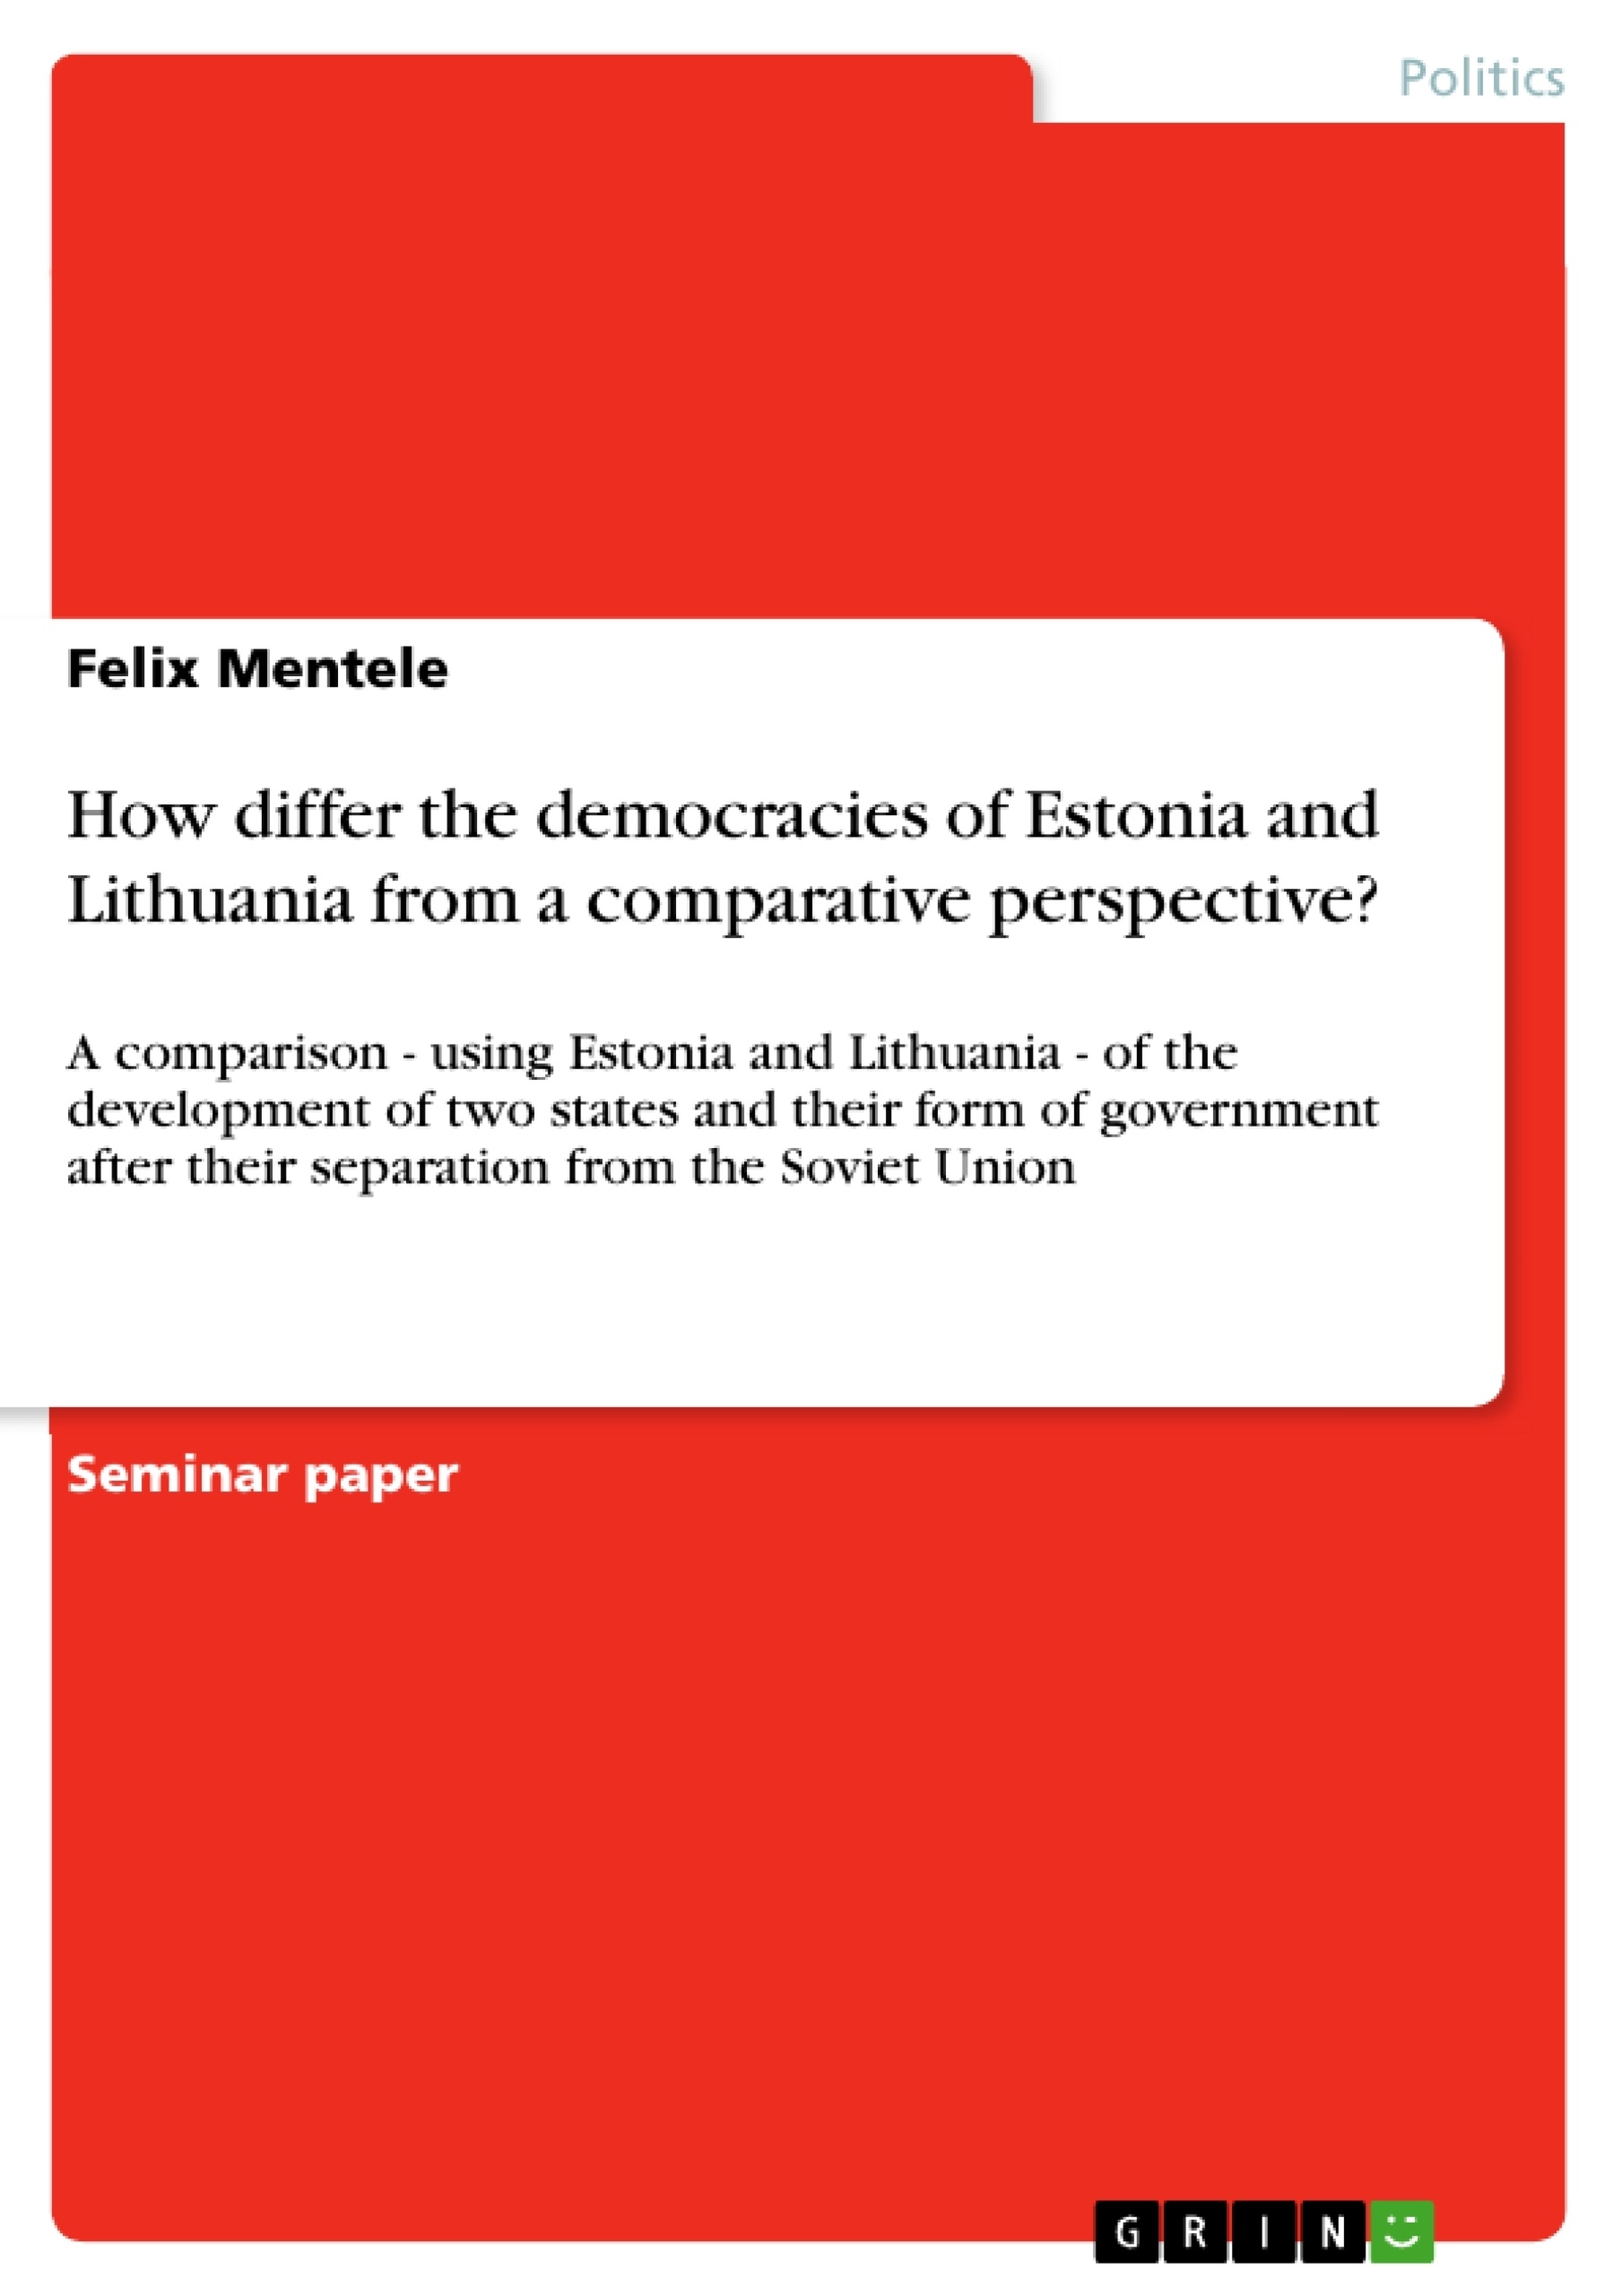 Titre: How differ the democracies of Estonia and Lithuania from a comparative perspective?